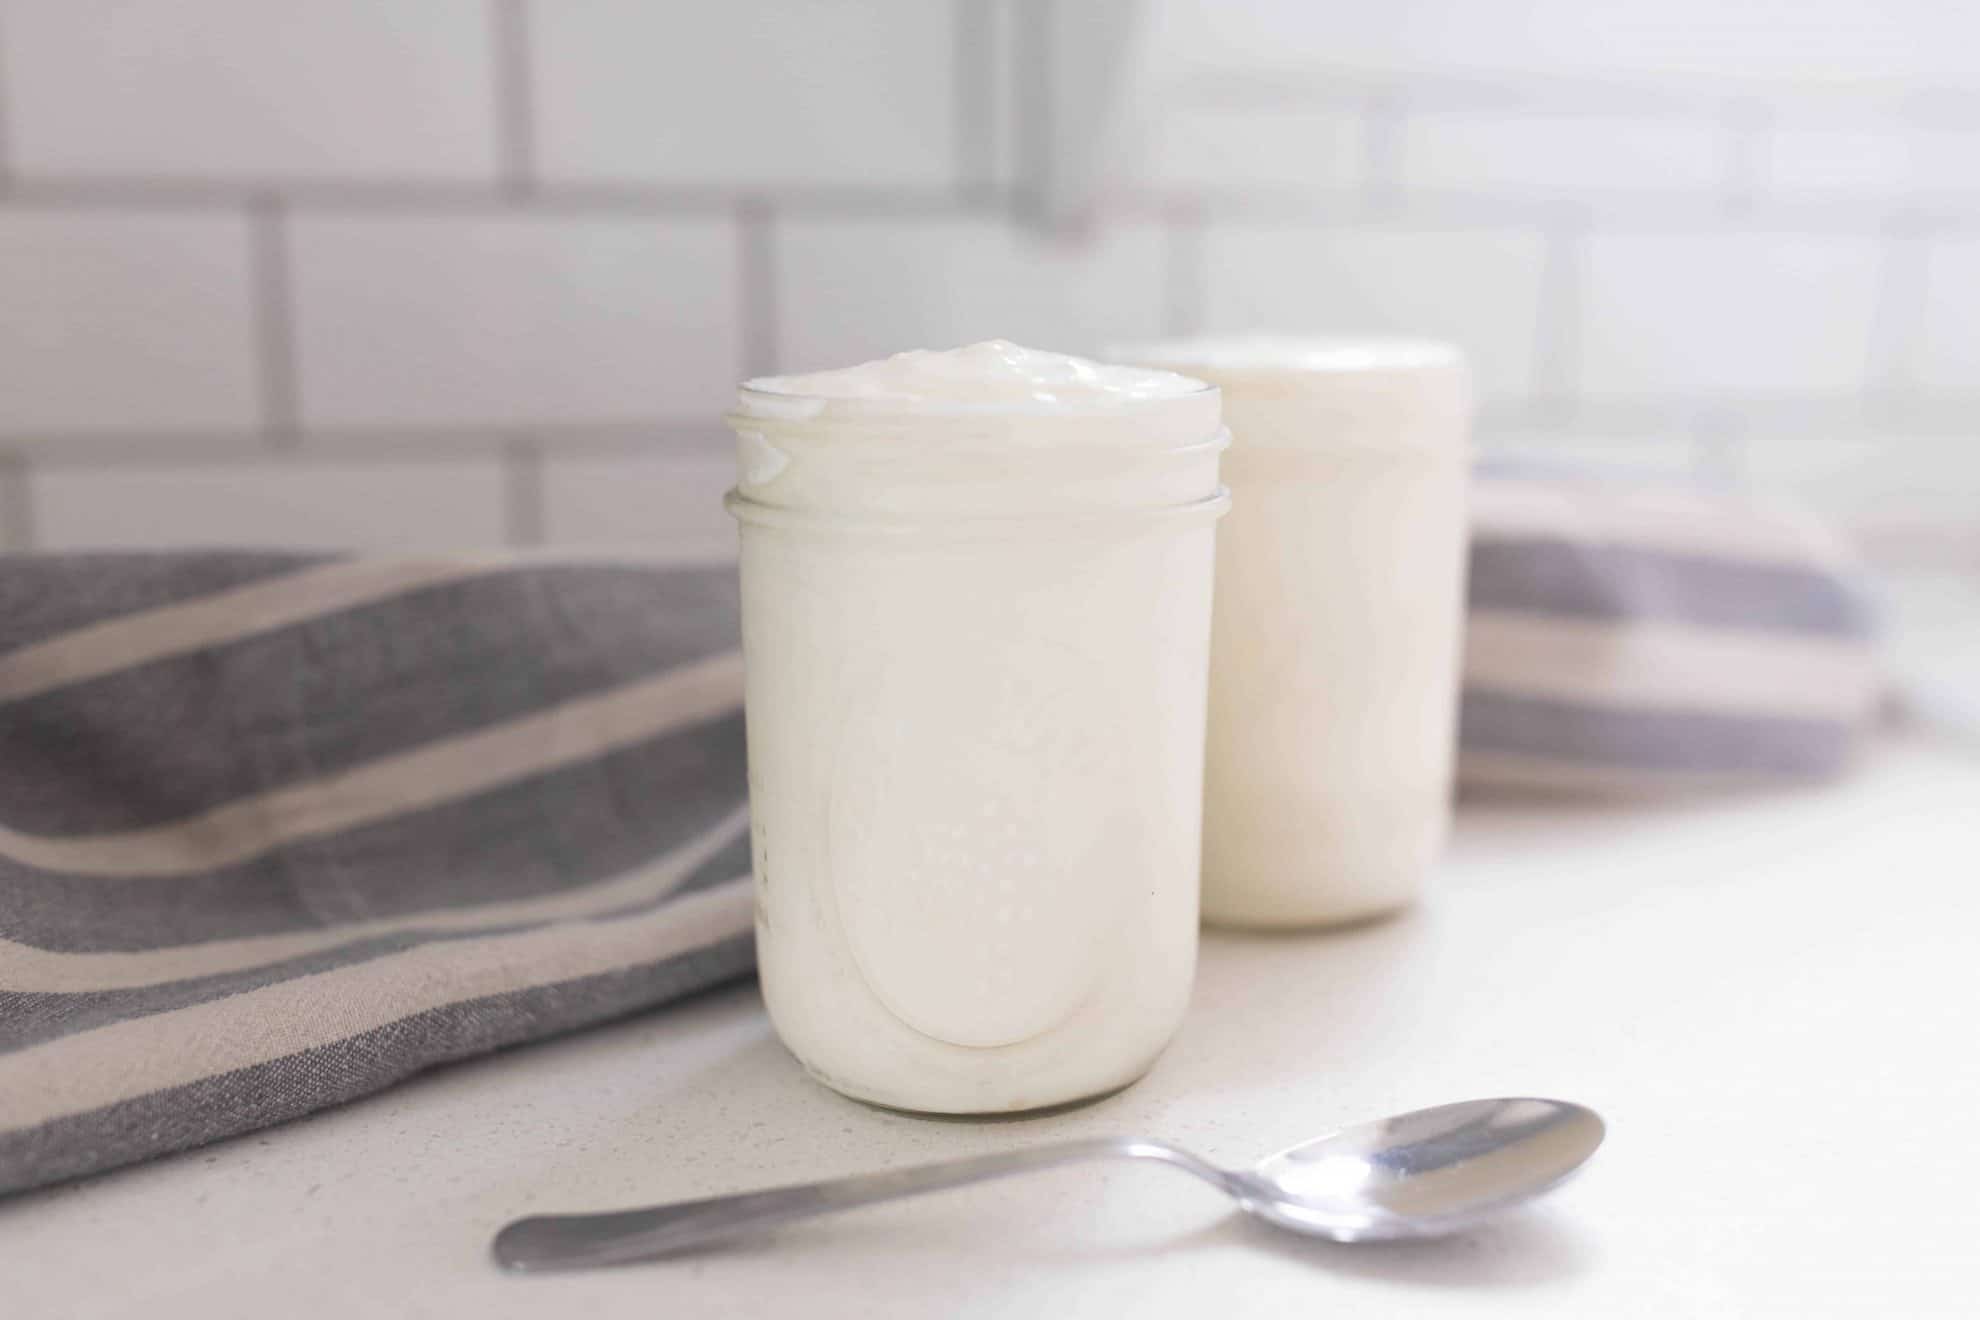 https://www.farmhouseonboone.com/wp-content/uploads/2018/04/how-to-make-yogurt-in-the-instant-pot-6.jpg